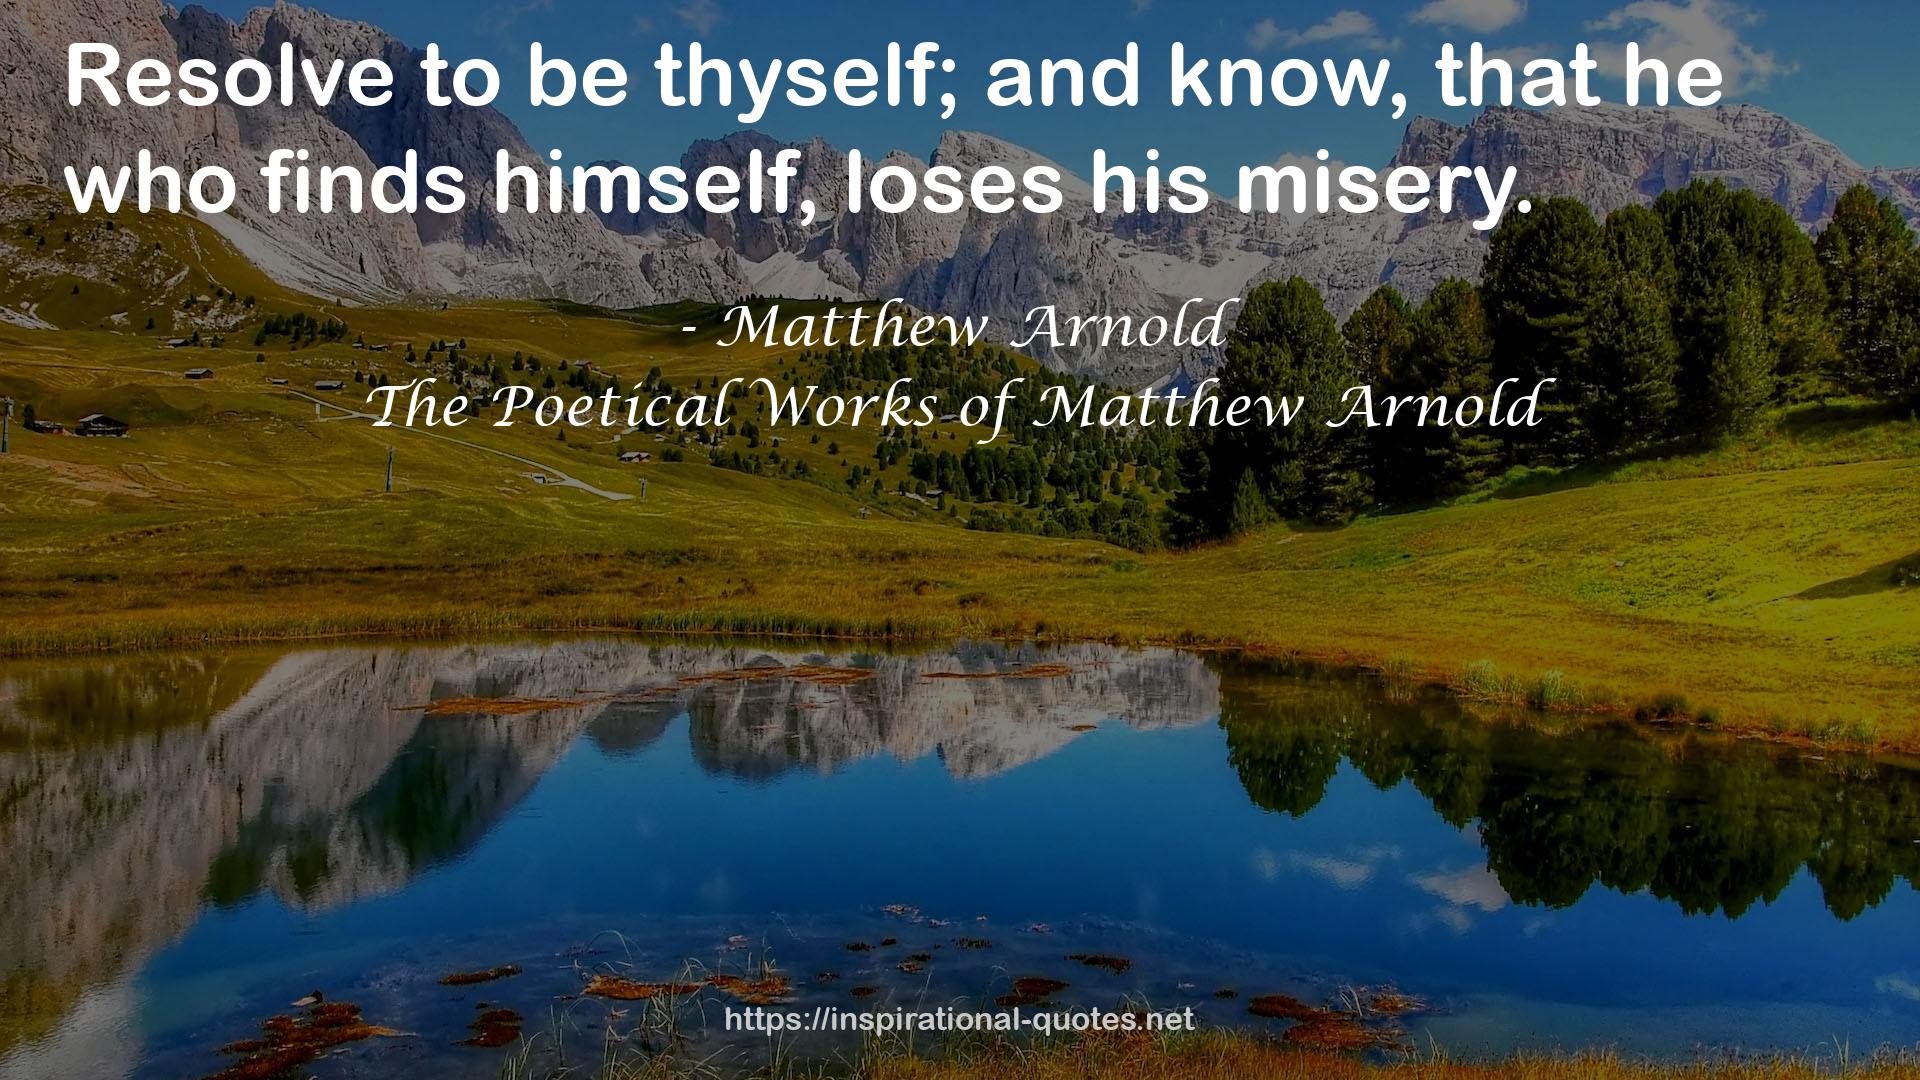 The Poetical Works of Matthew Arnold QUOTES